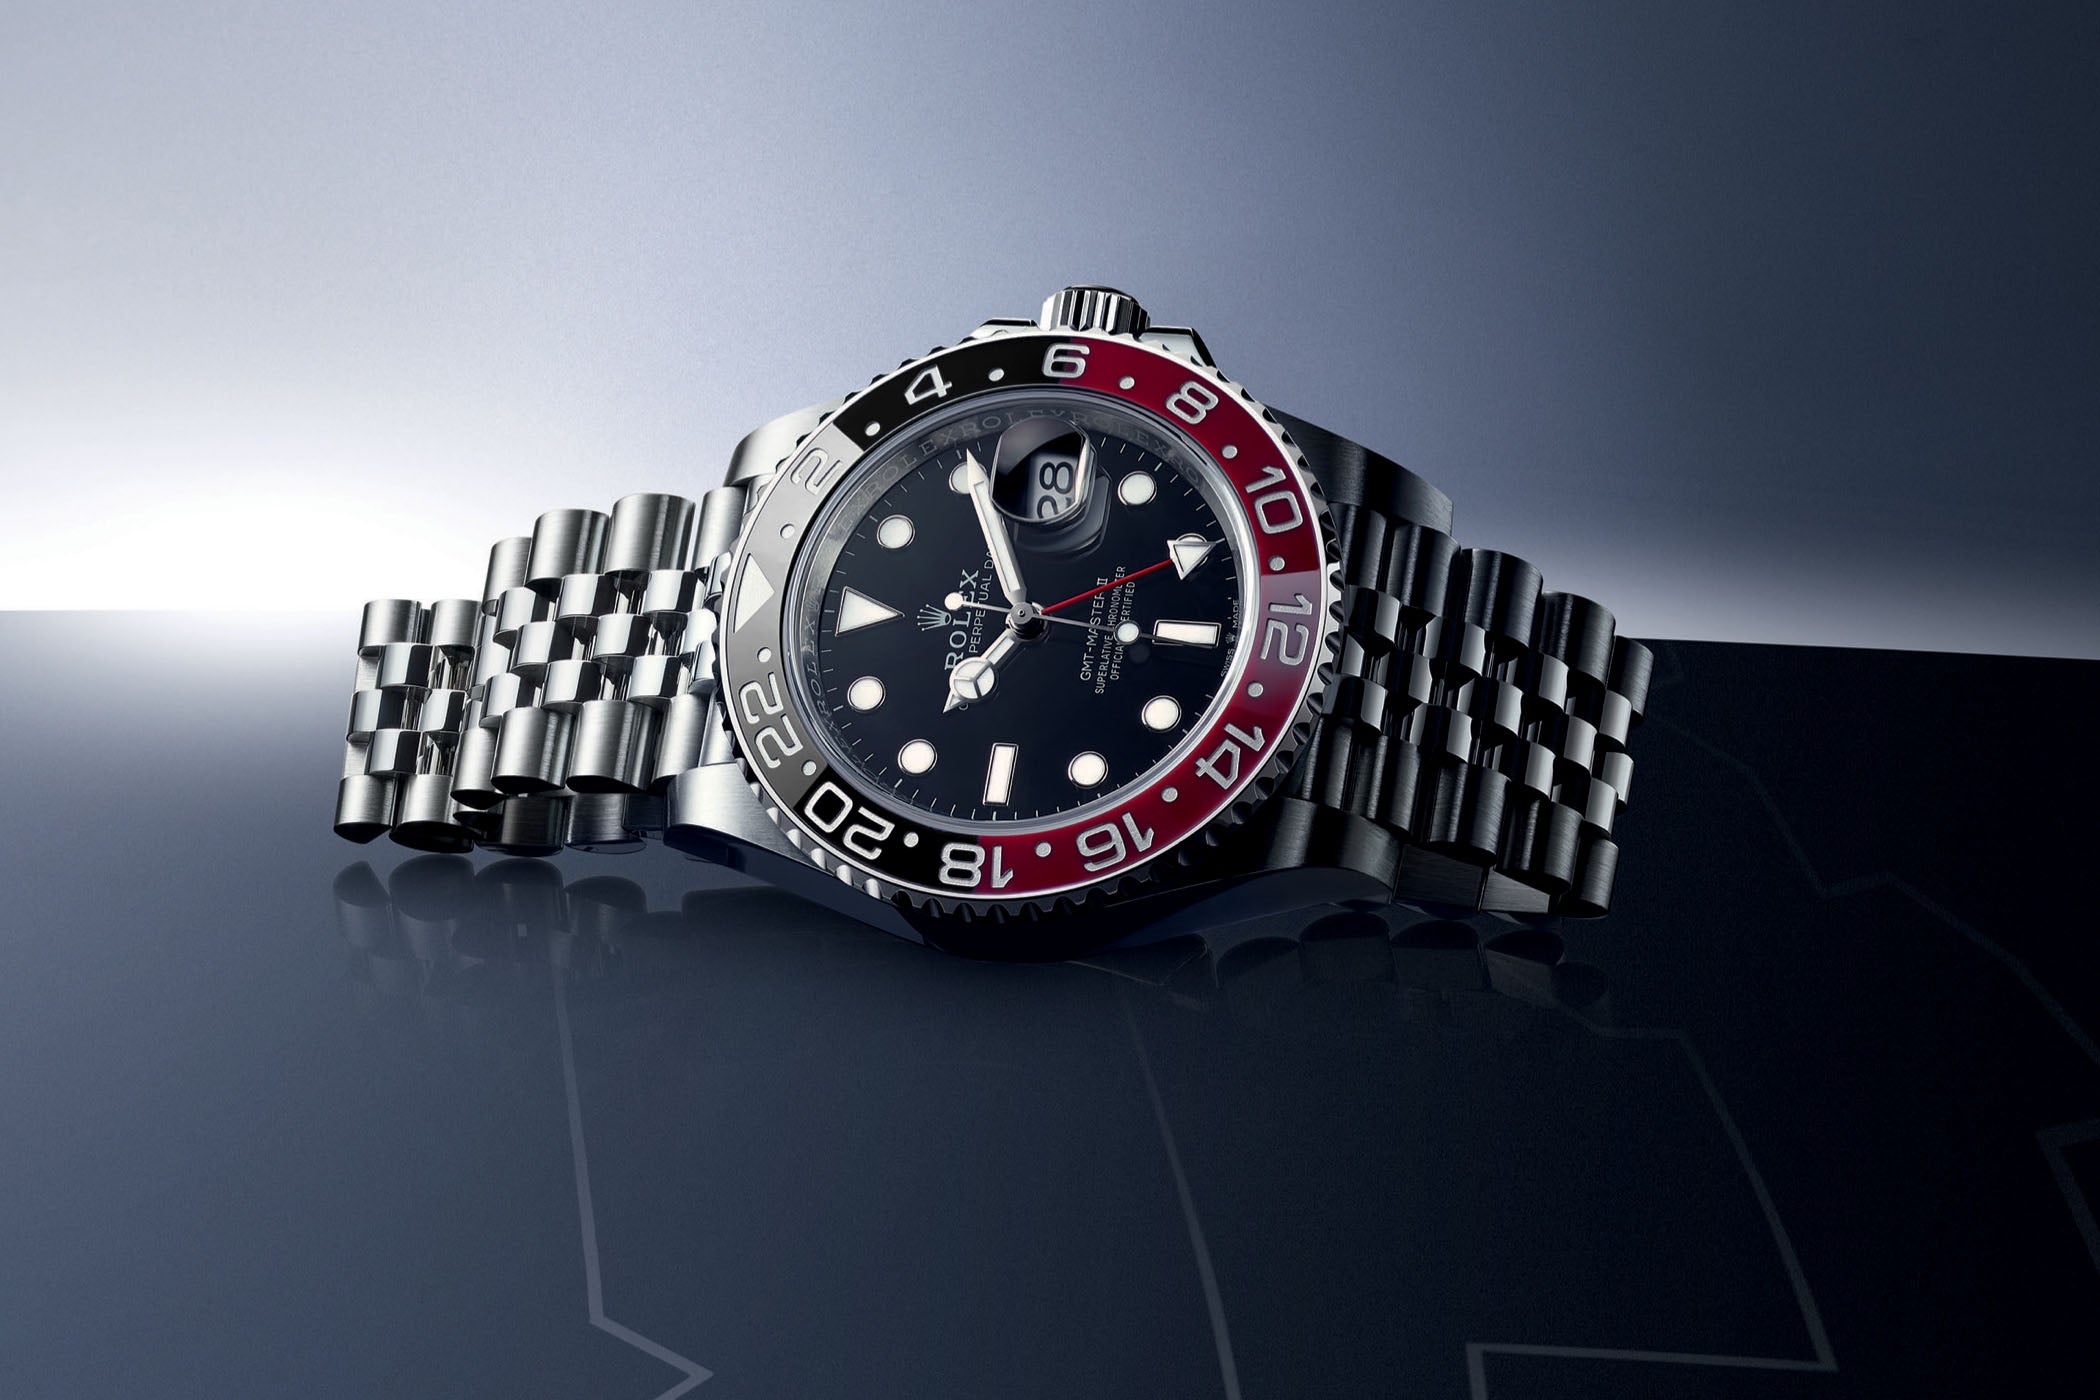 Our Rolex Novelty Predictions For 2023